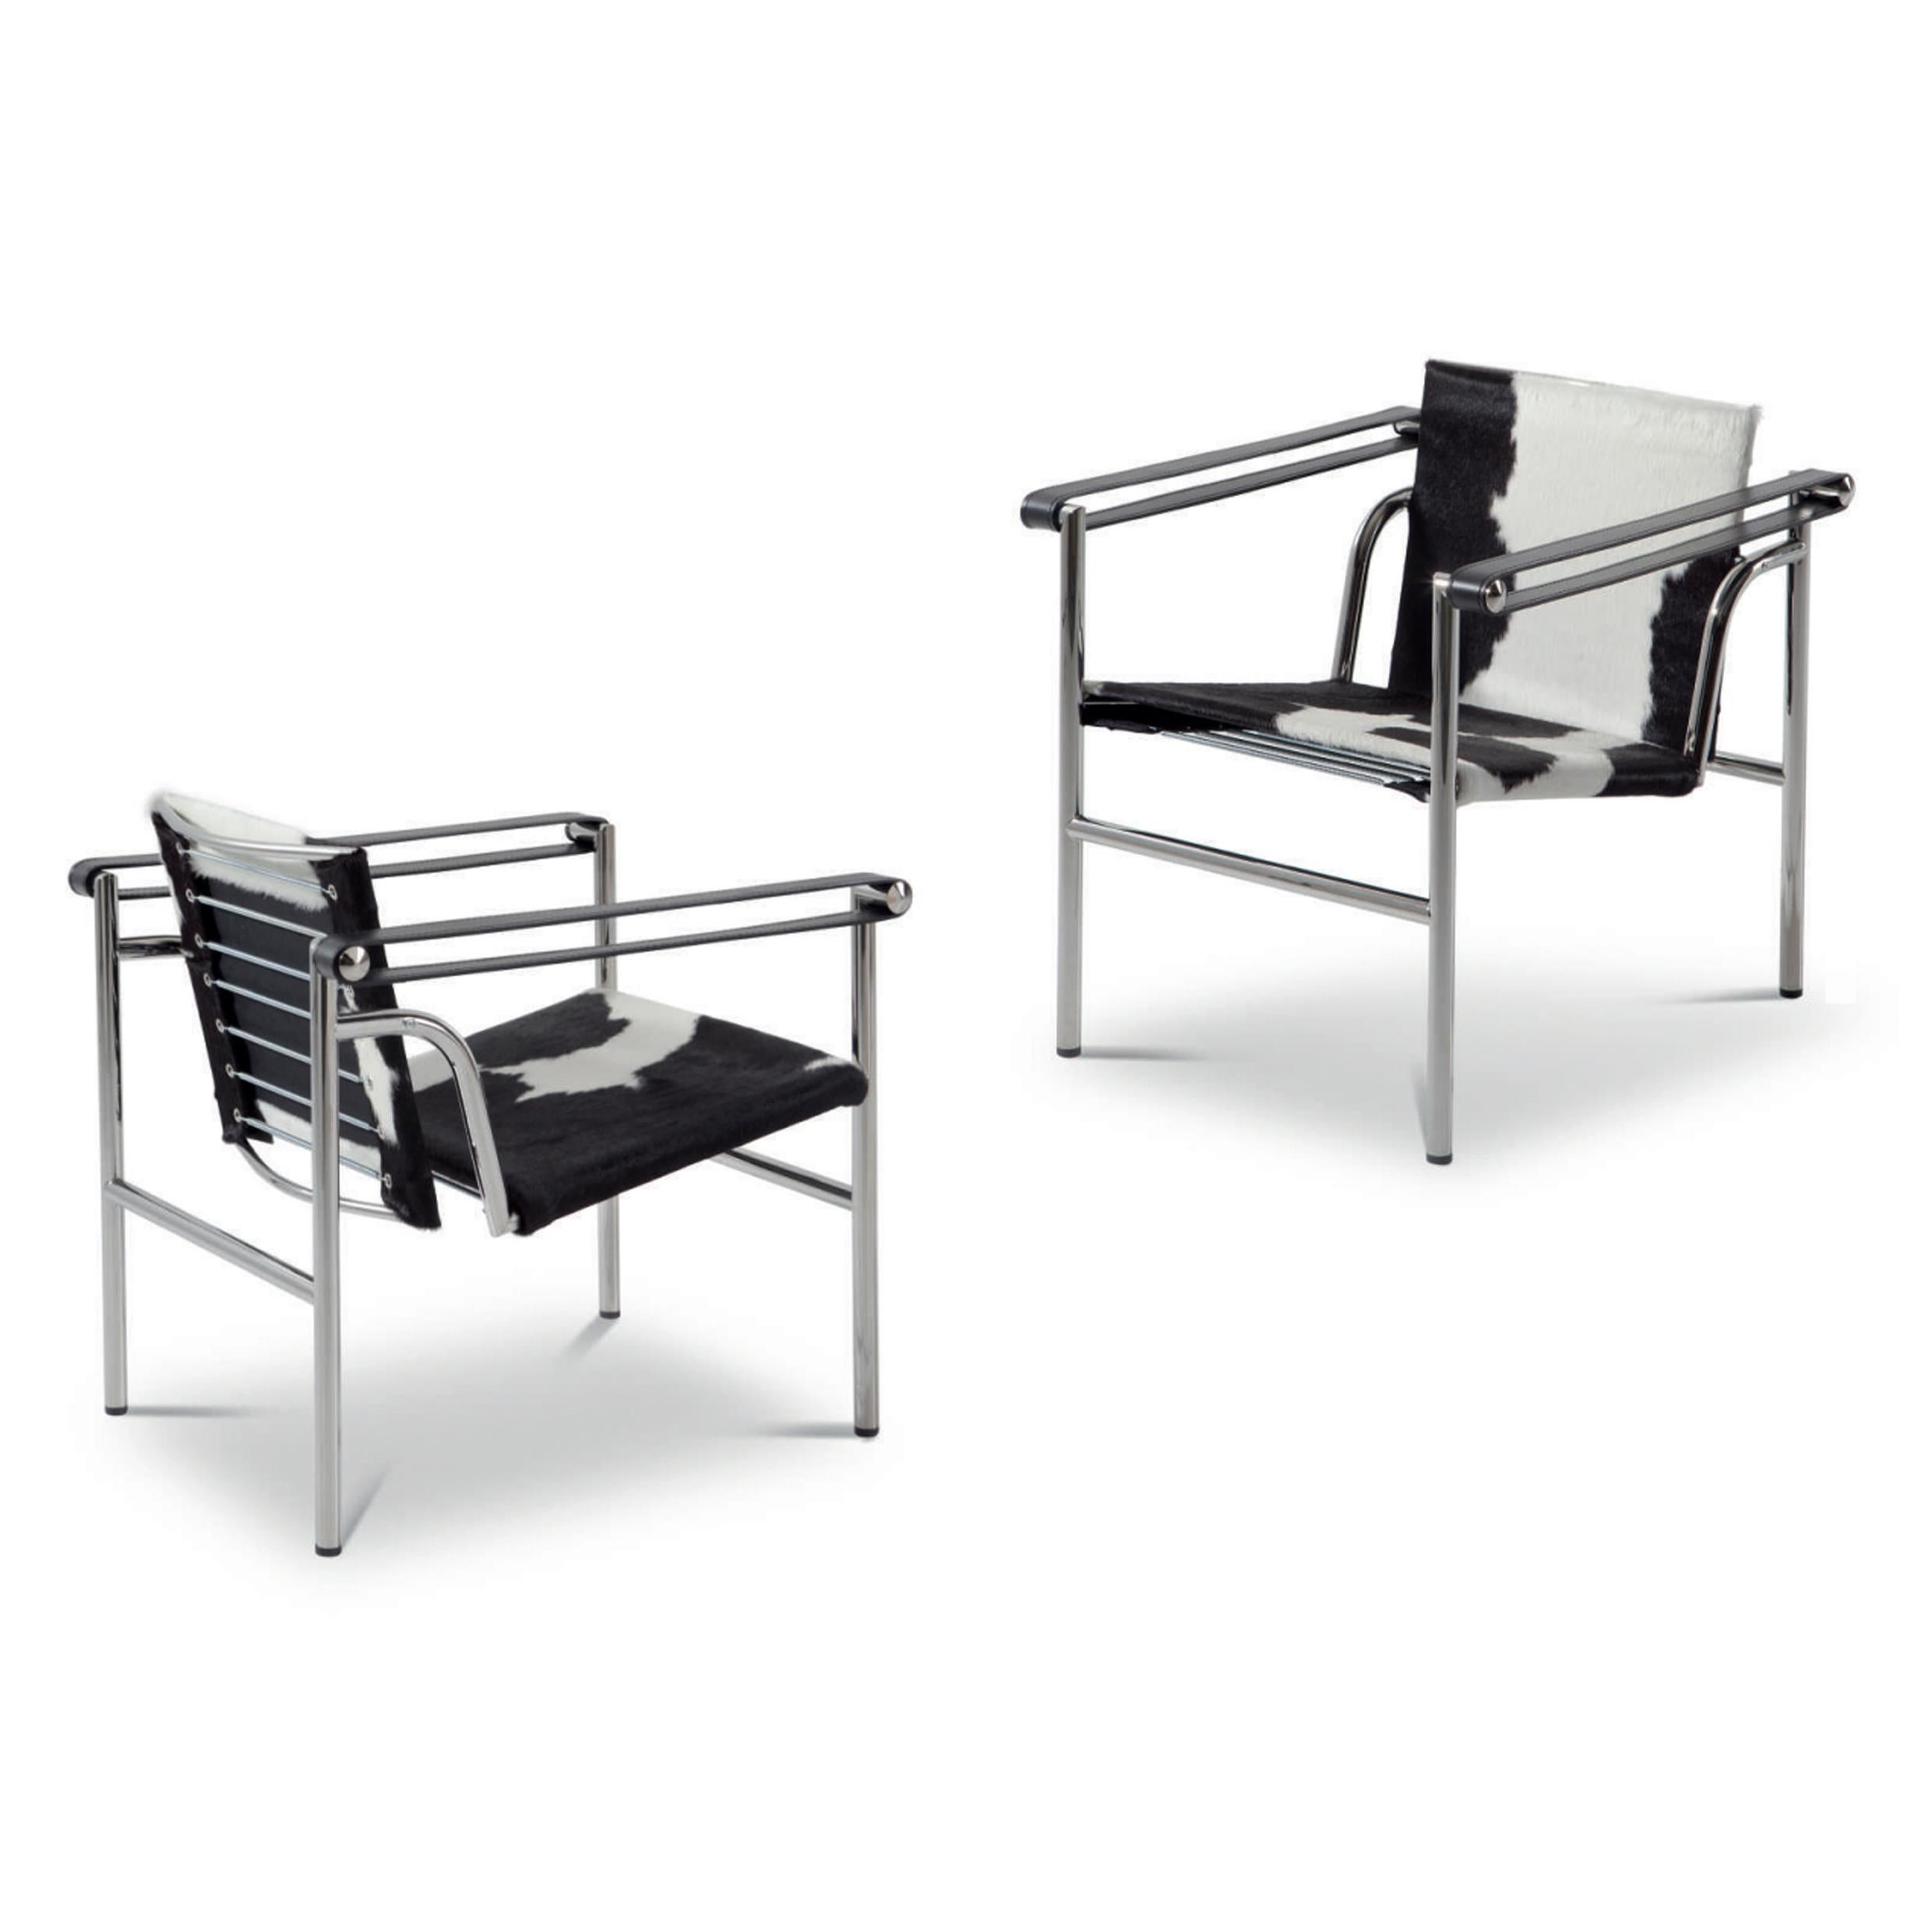 Mid-Century Modern Set of Two Lc1 Chairs by Le Corbusier, Pierre Jeanneret, Charlotte Perriand